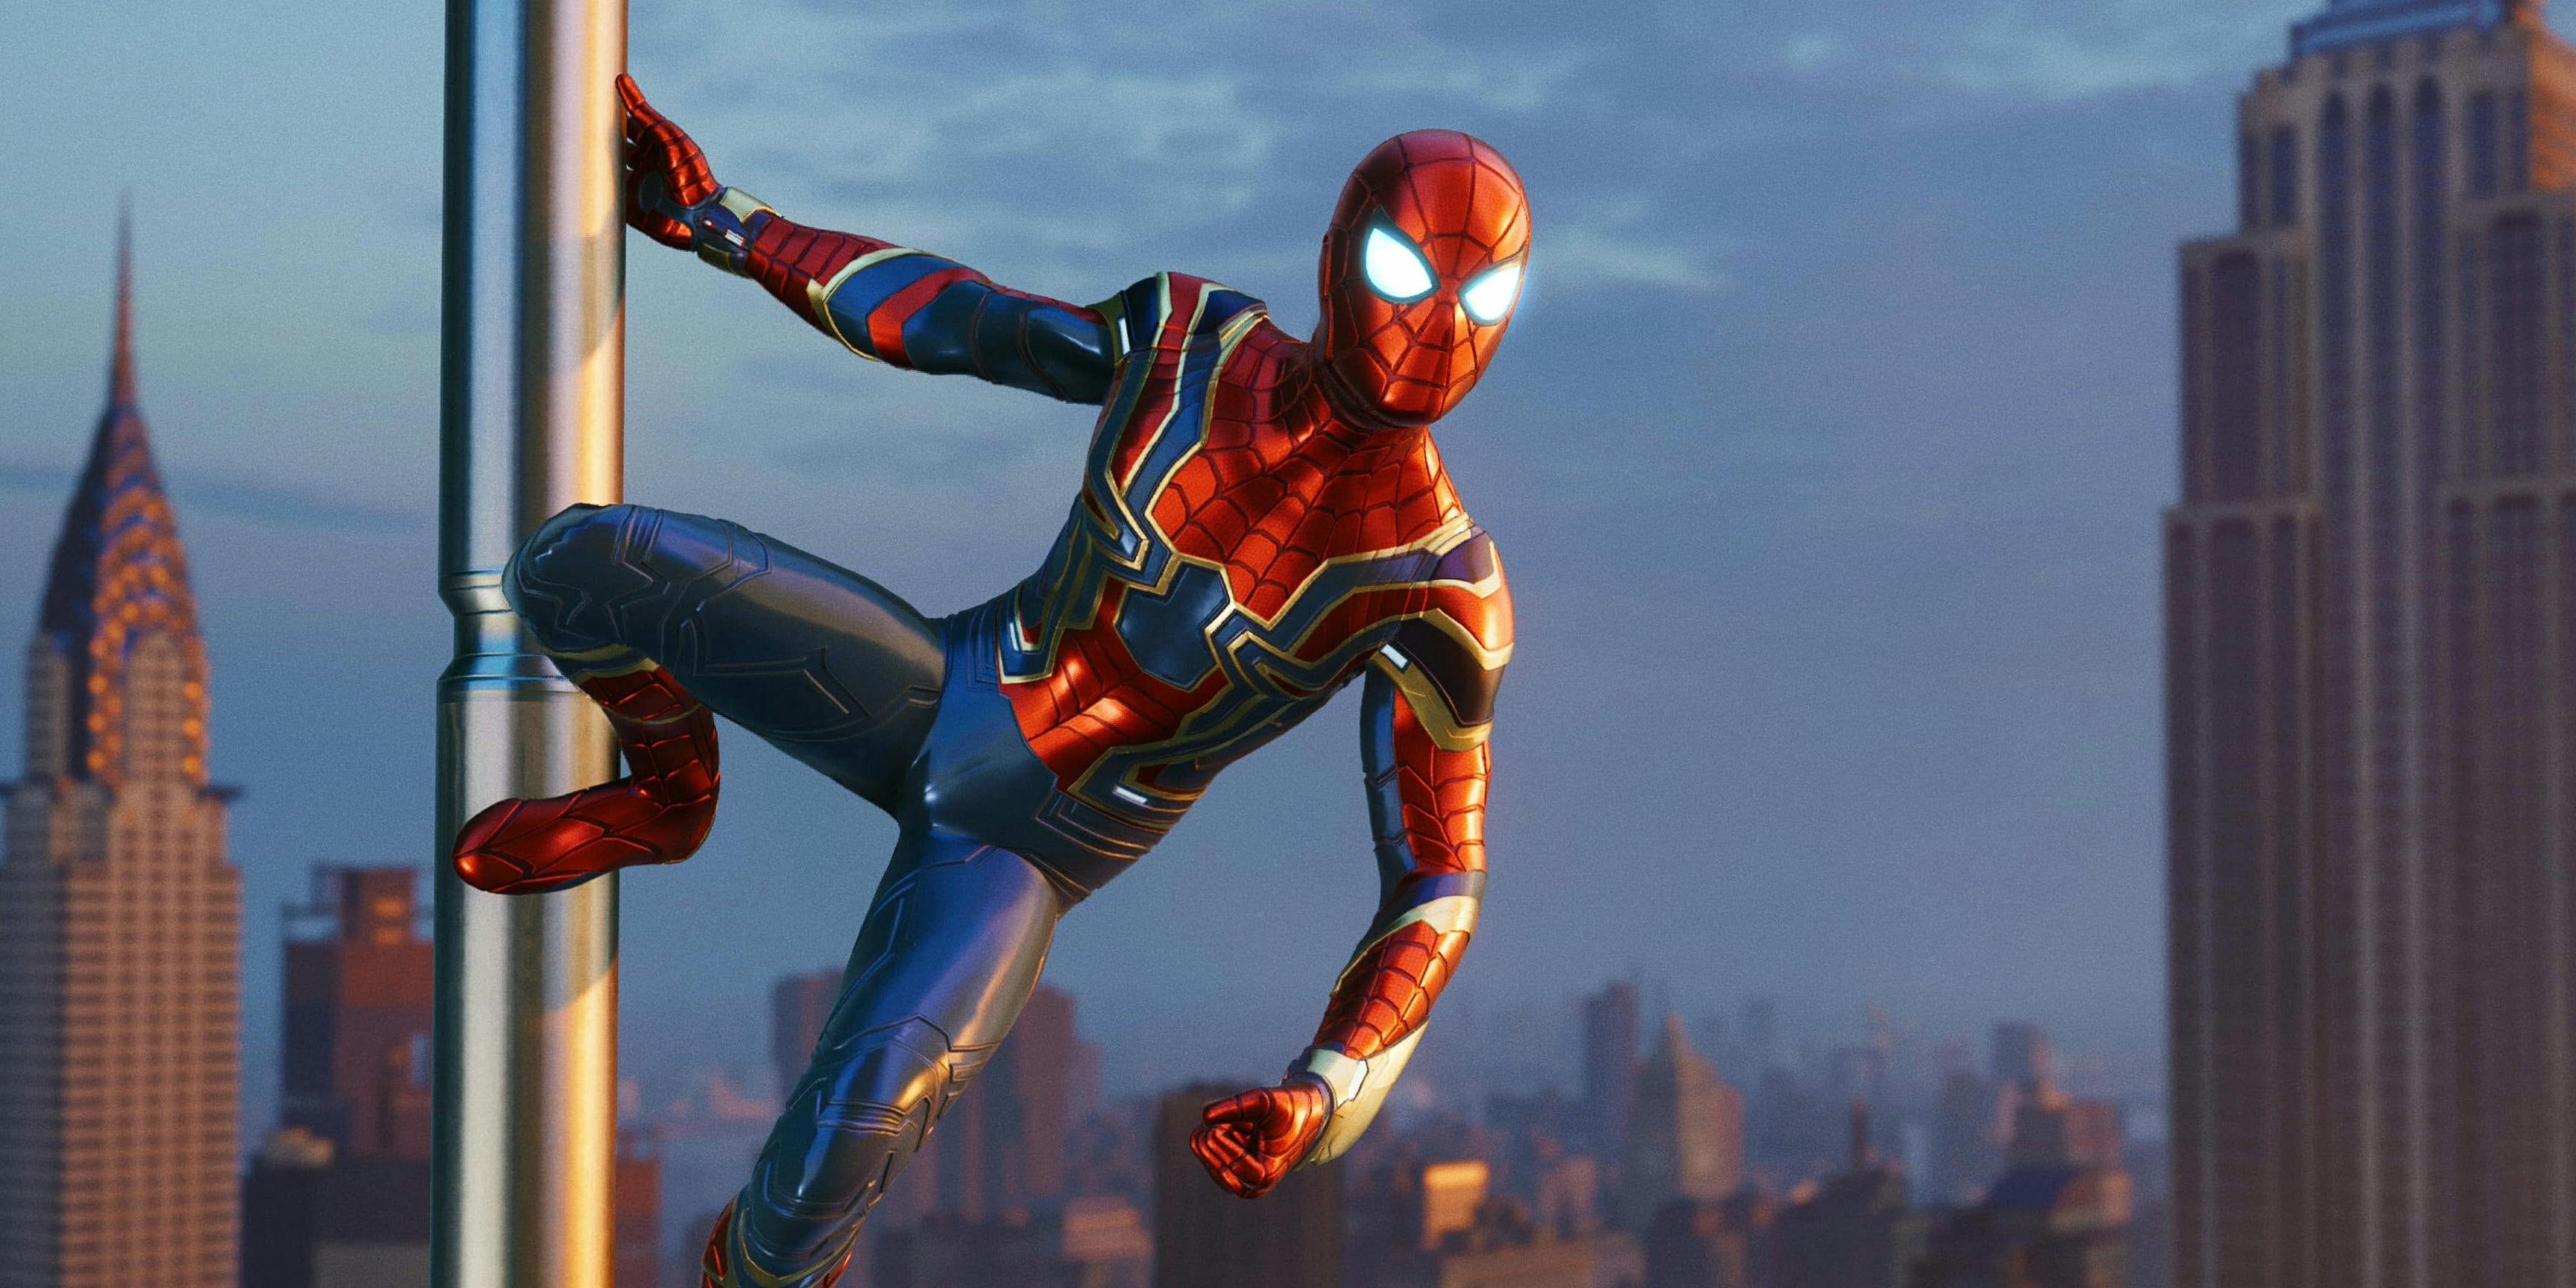 The Top Six Spider-Man 2 Games Of All Time - Game Informer